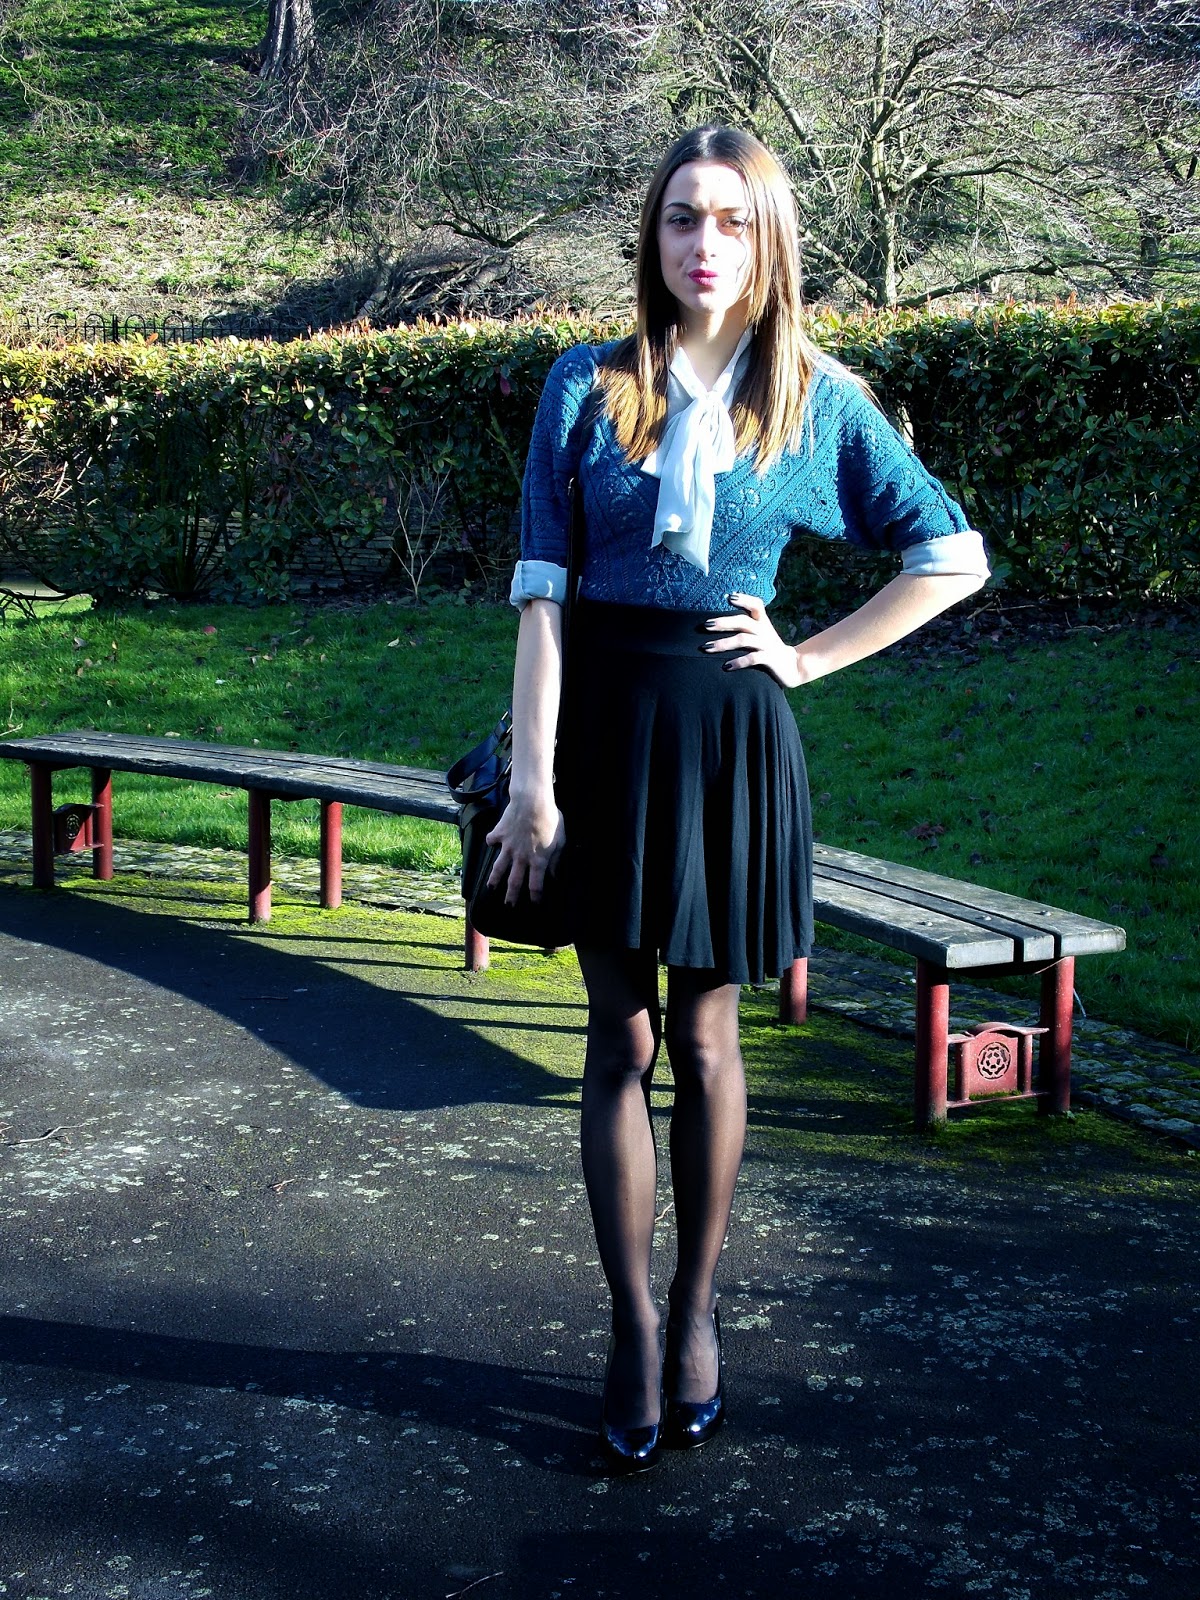 It's a tight thing - Fashionmylegs : The tights and hosiery blog